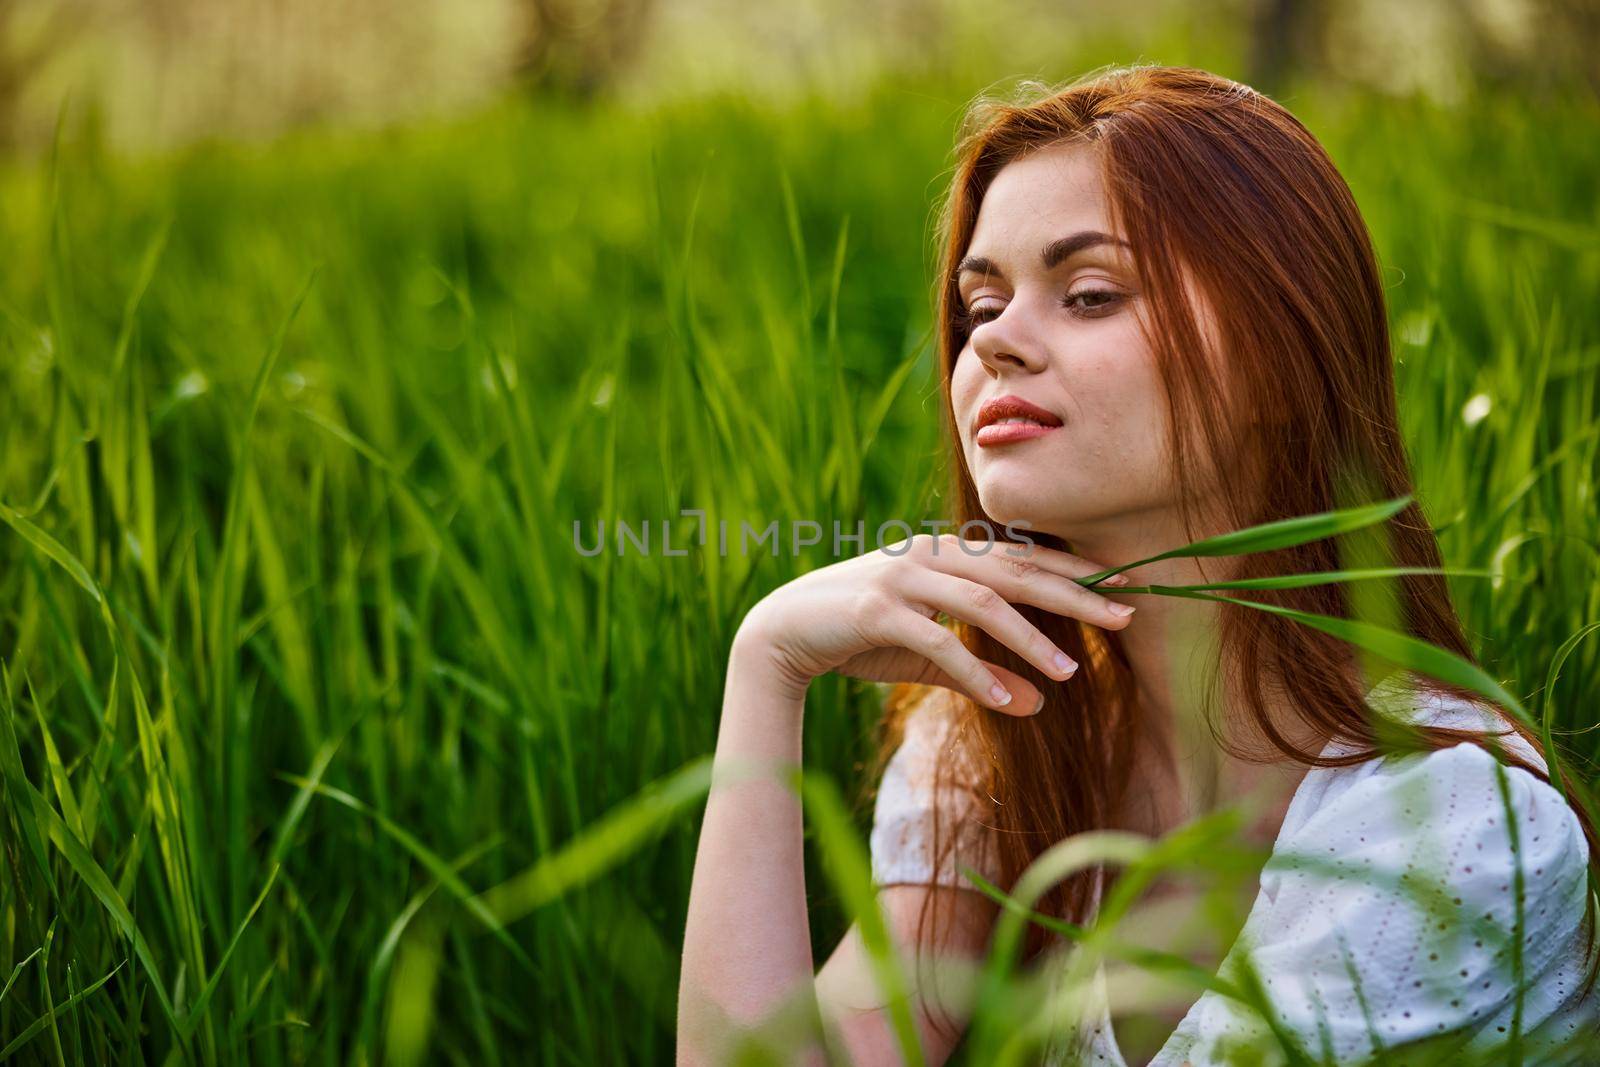 portrait of a blissfully smiling woman sitting in the grass with a leaf in her hand. High quality photo